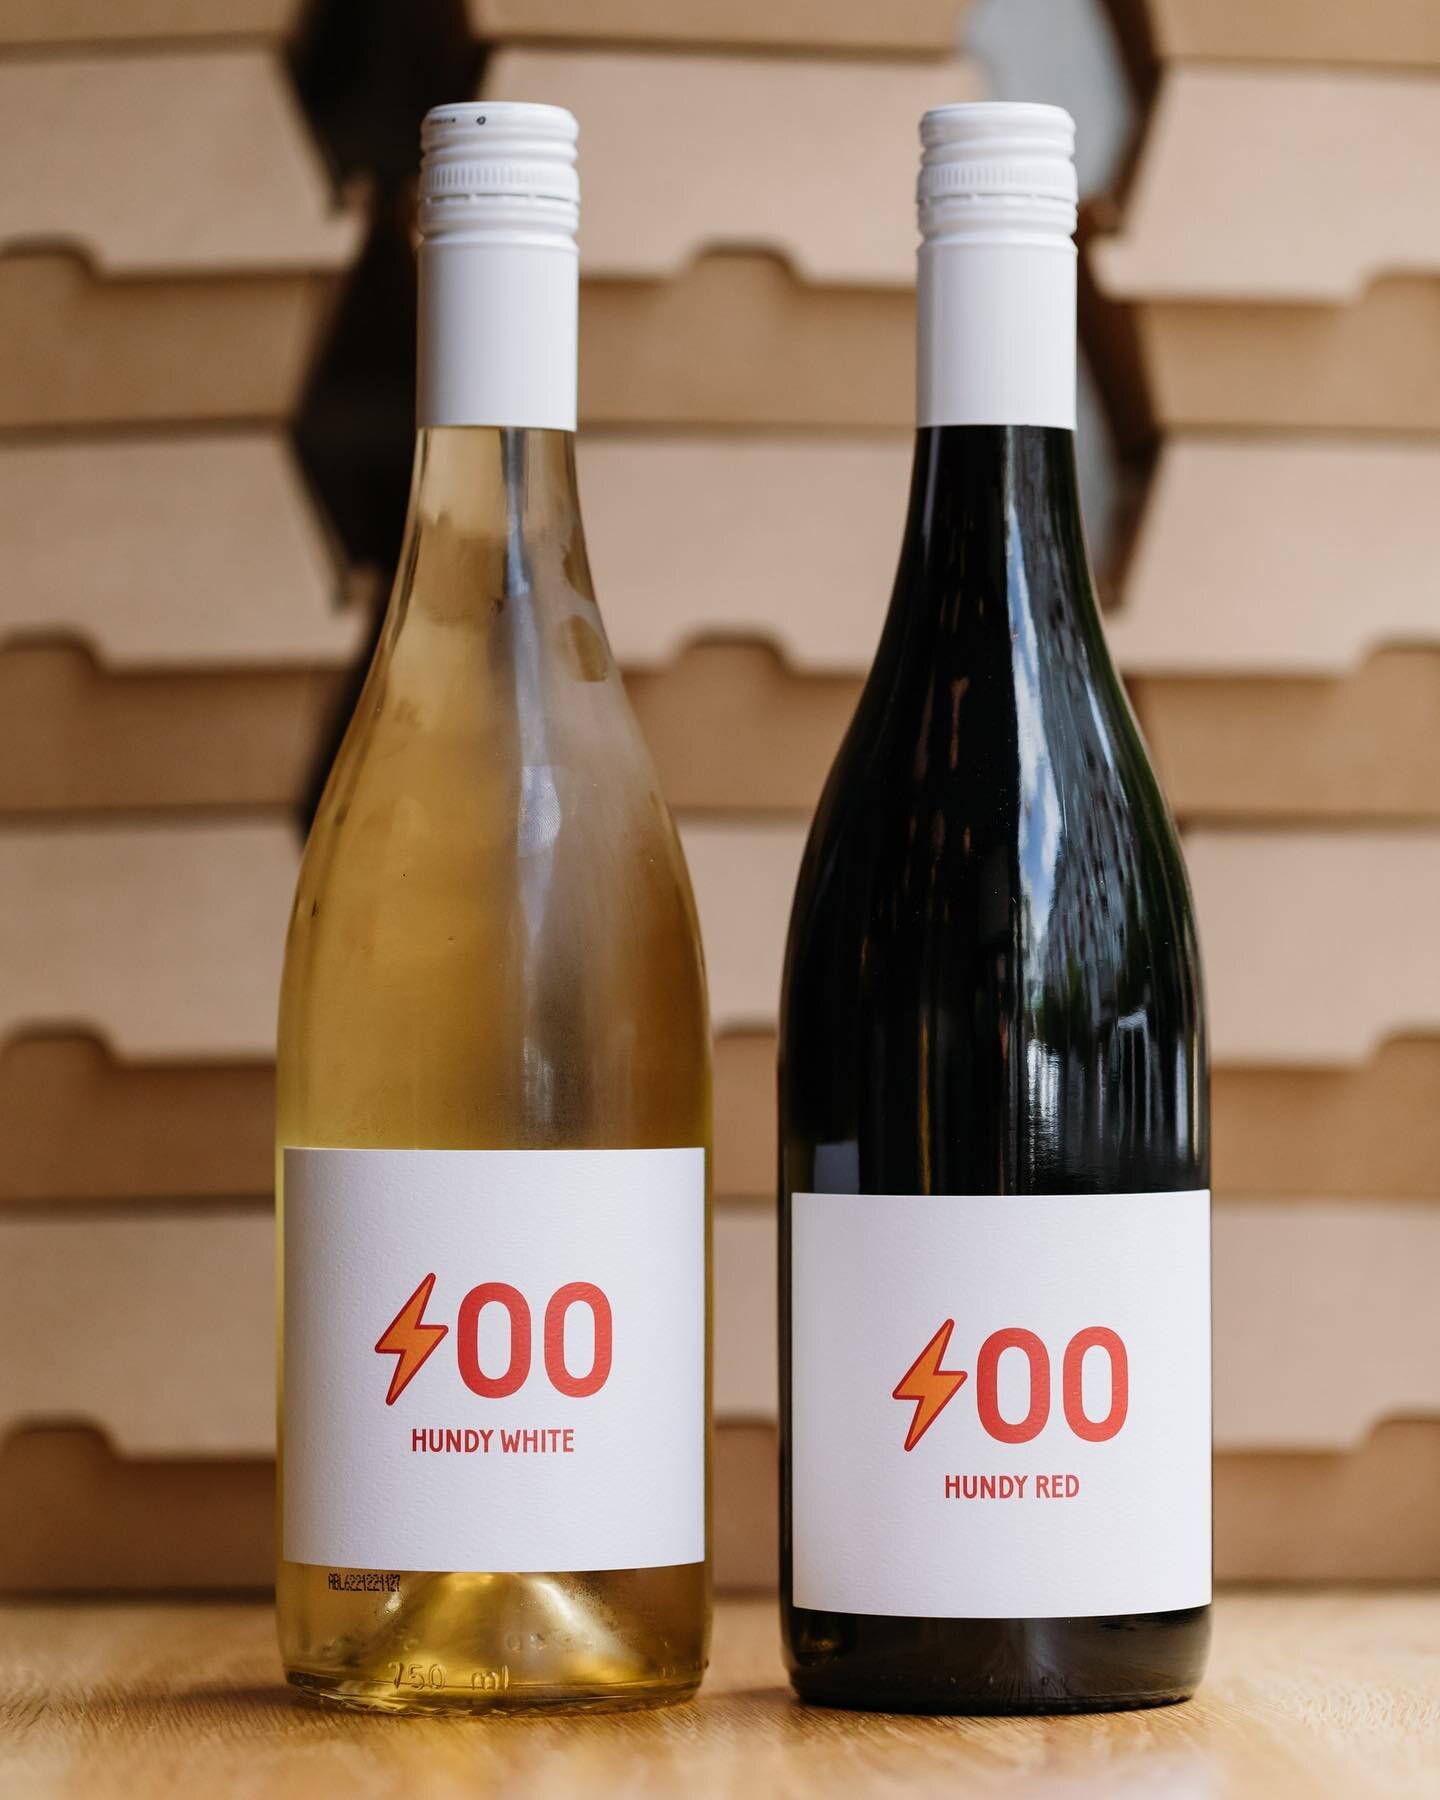 hundy wine available at our brick and mortar in vancouver #hundy #hundyburger
&bull;
&bull;
&bull;
&bull;
&bull;
#artofplating #gastropost #vancity
#cheflife #westcoast #beautifulbc #vancouverfood #staffcanteen #food #kitchen #yvr #vancouverisawesome